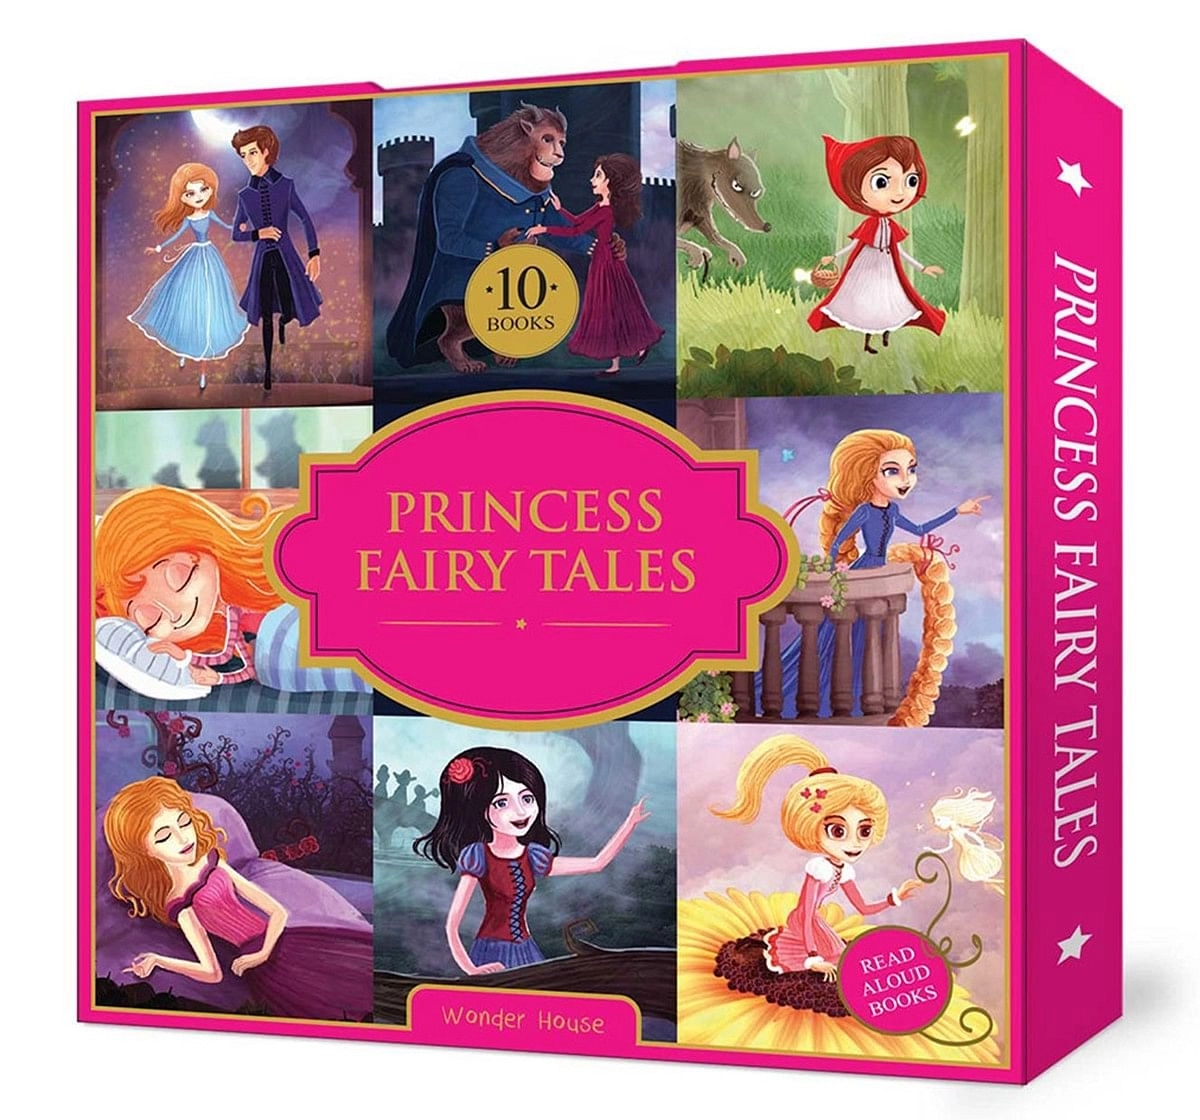 Princess Fairy Tales Boxset: A Set Of 10 Classic Children Fairy Tales Book, 160 Pages Book By Wonder House Books, Box Set